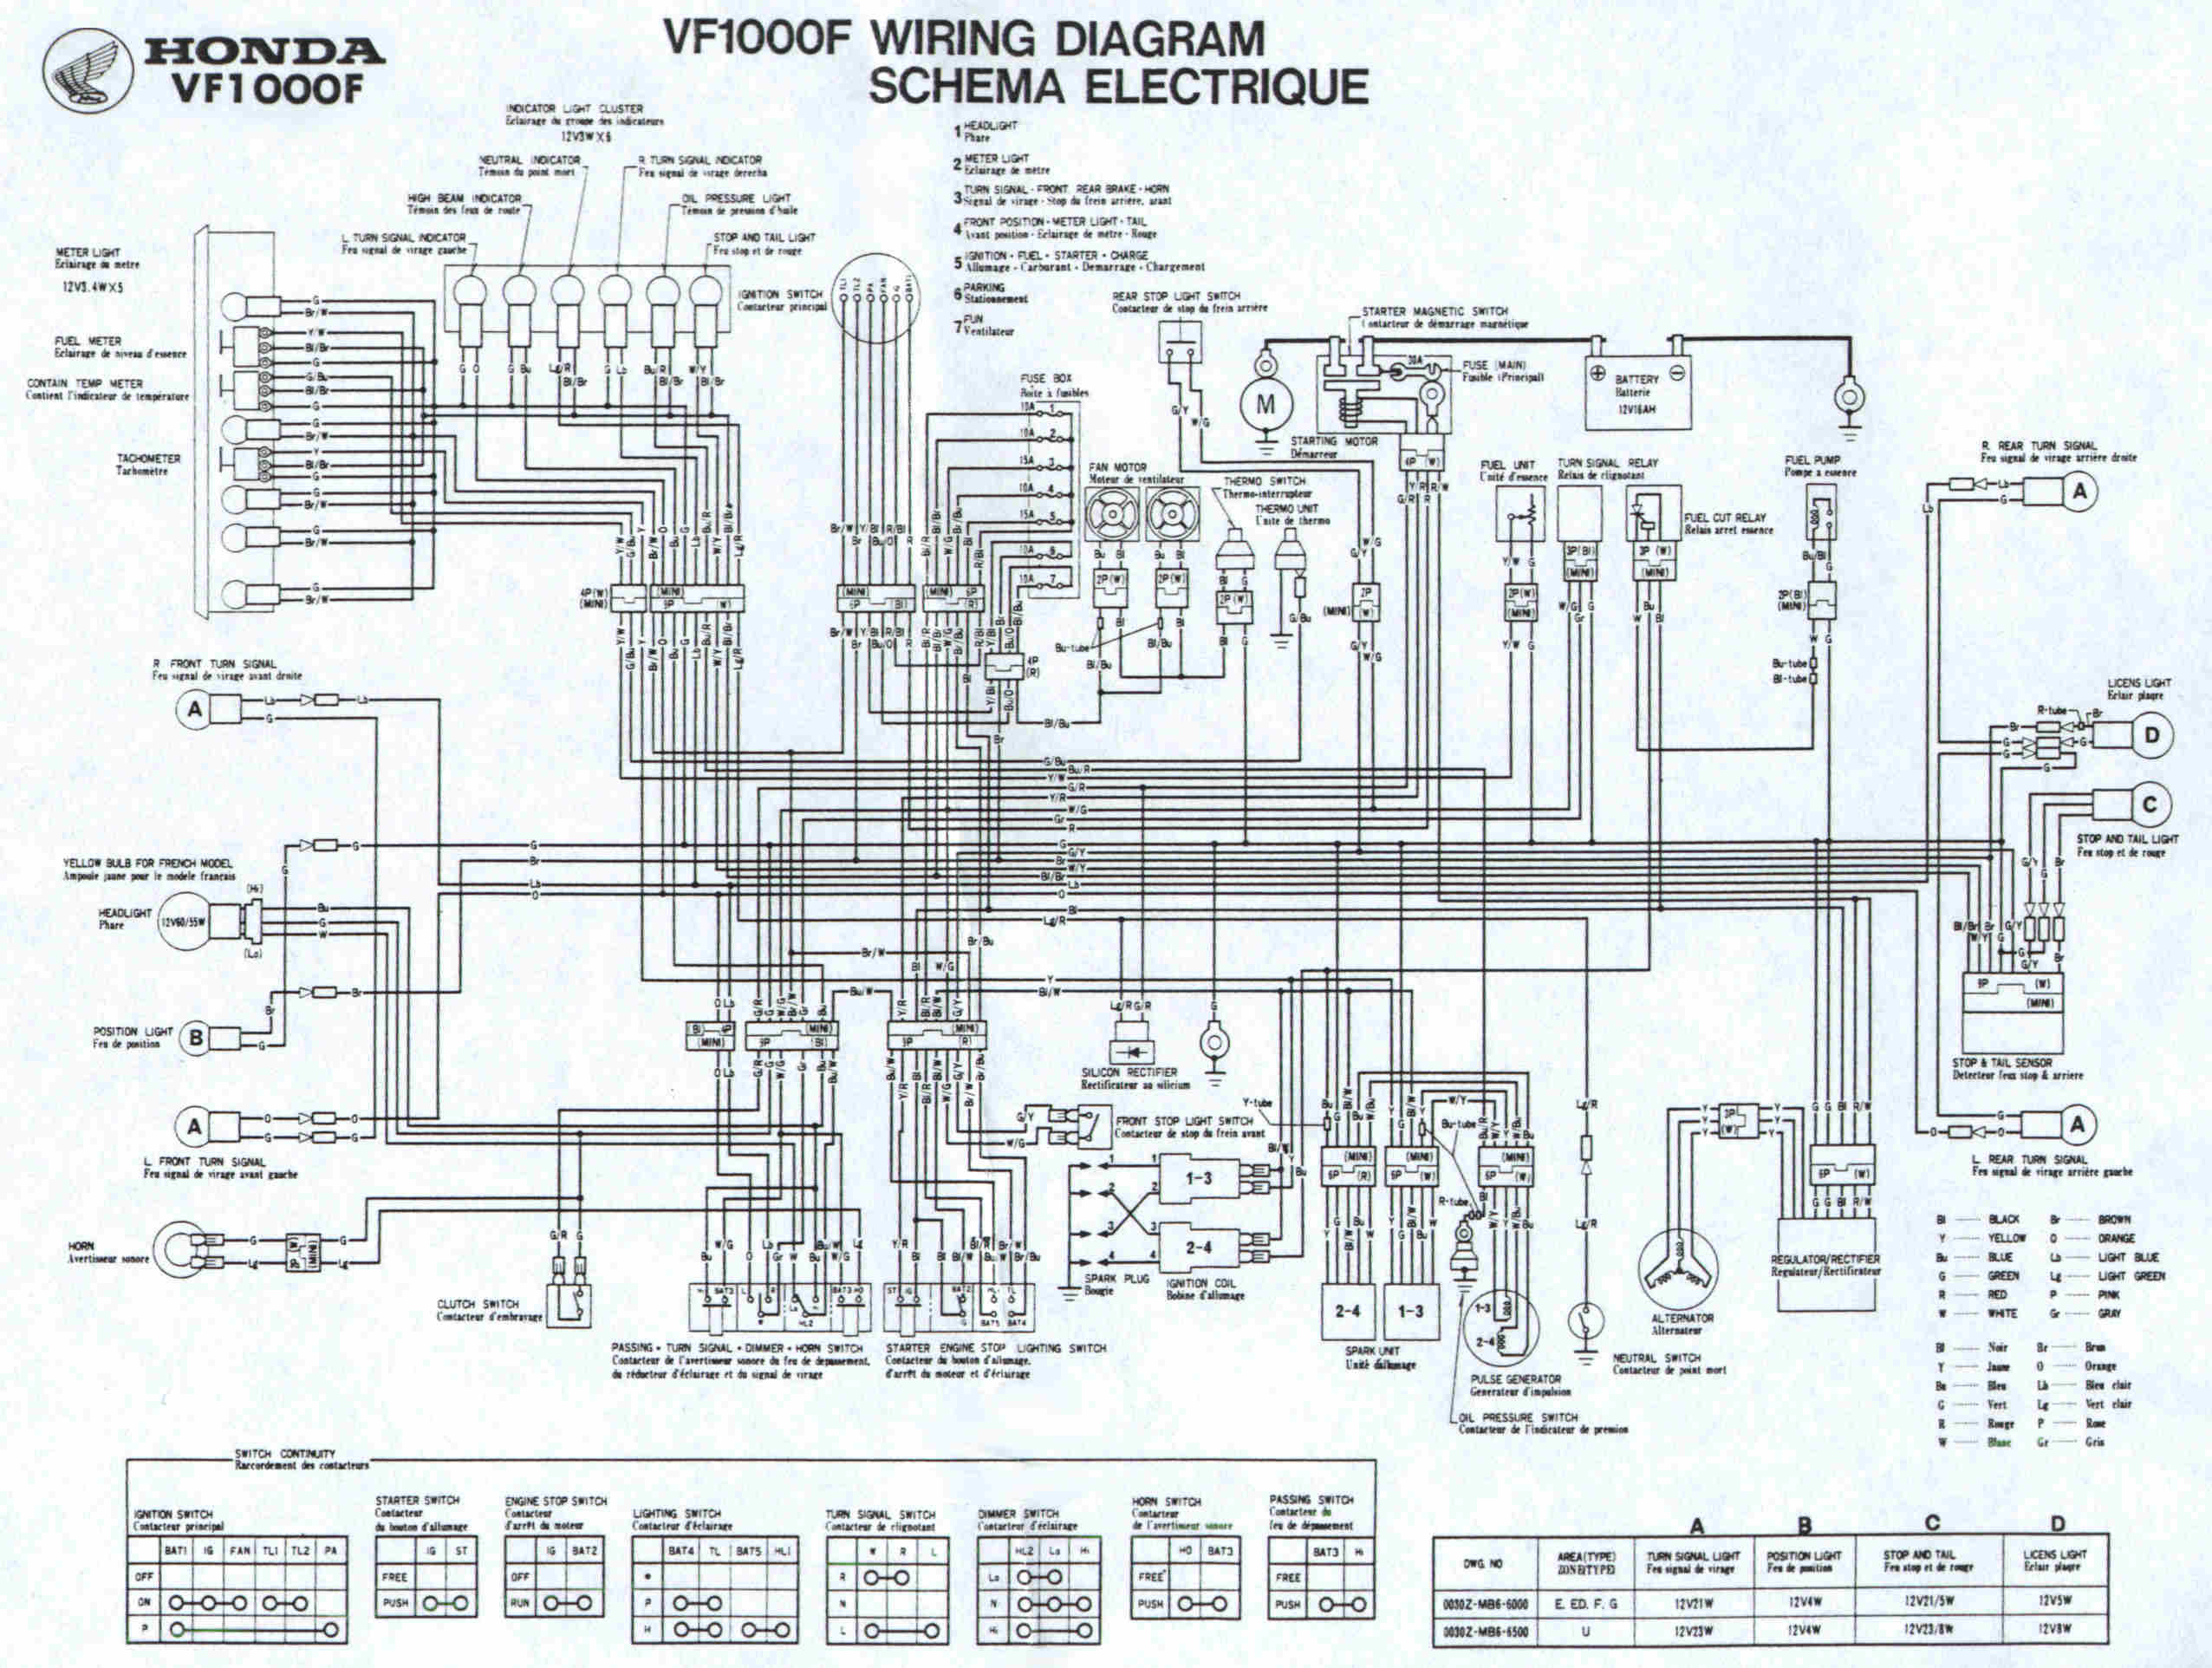 Drnikonian, Free Image For Wiring Diagrams And Engine ... vulcan 750 wiring diagram 